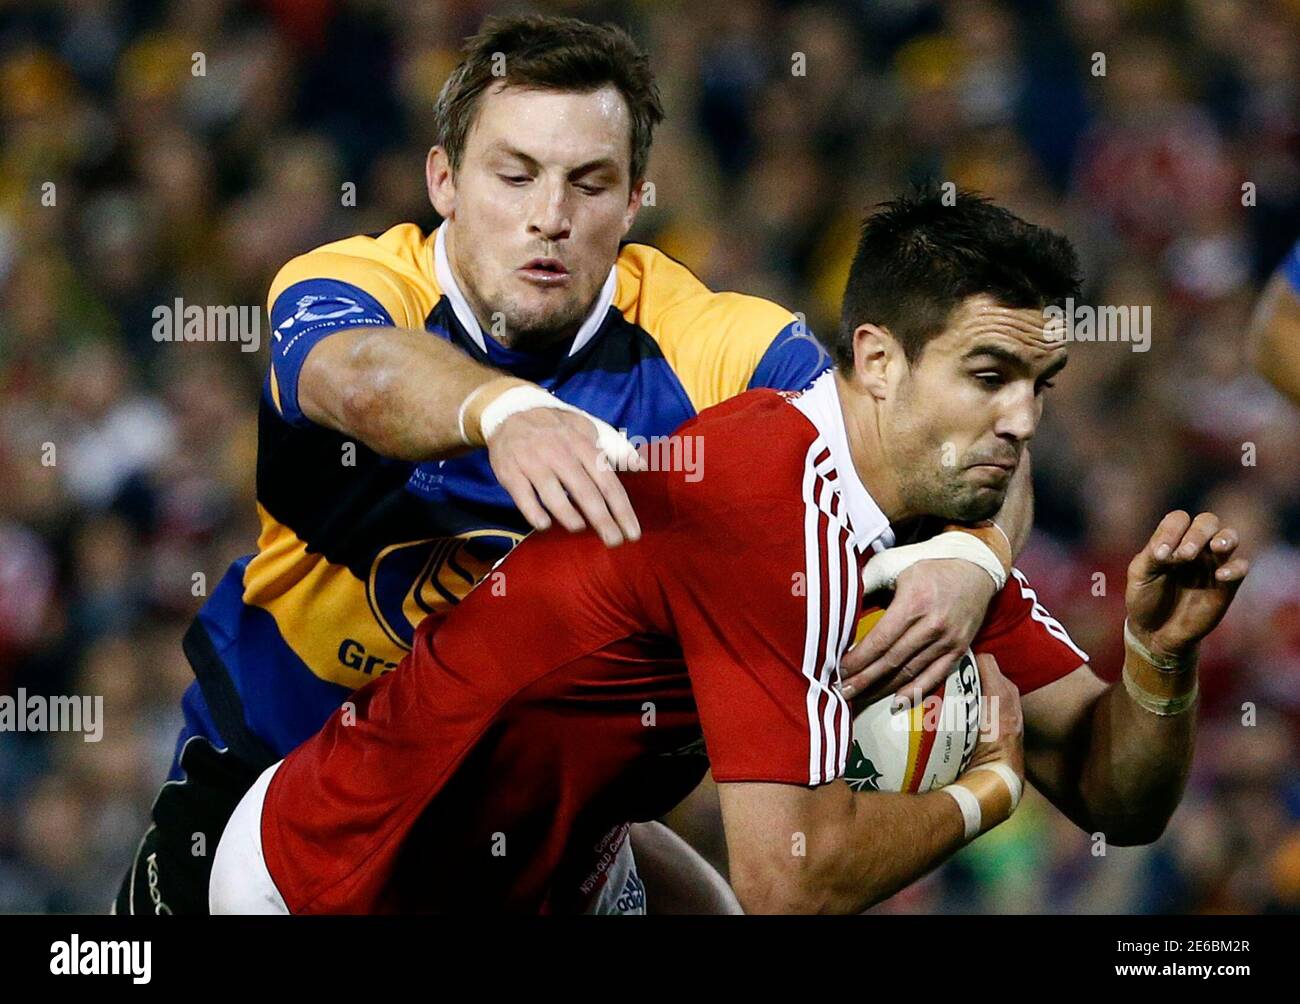 British and Irish Lions player Conor Murray (front) scores a try as Combined NSW-Queensland Country's Nathan Trist fails to stop him during their rugby union game at Hunter Stadium in Newcastle June 11, 2013.  REUTERS/Daniel Munoz (AUSTRALIA - Tags: SPORT RUGBY) Stock Photo